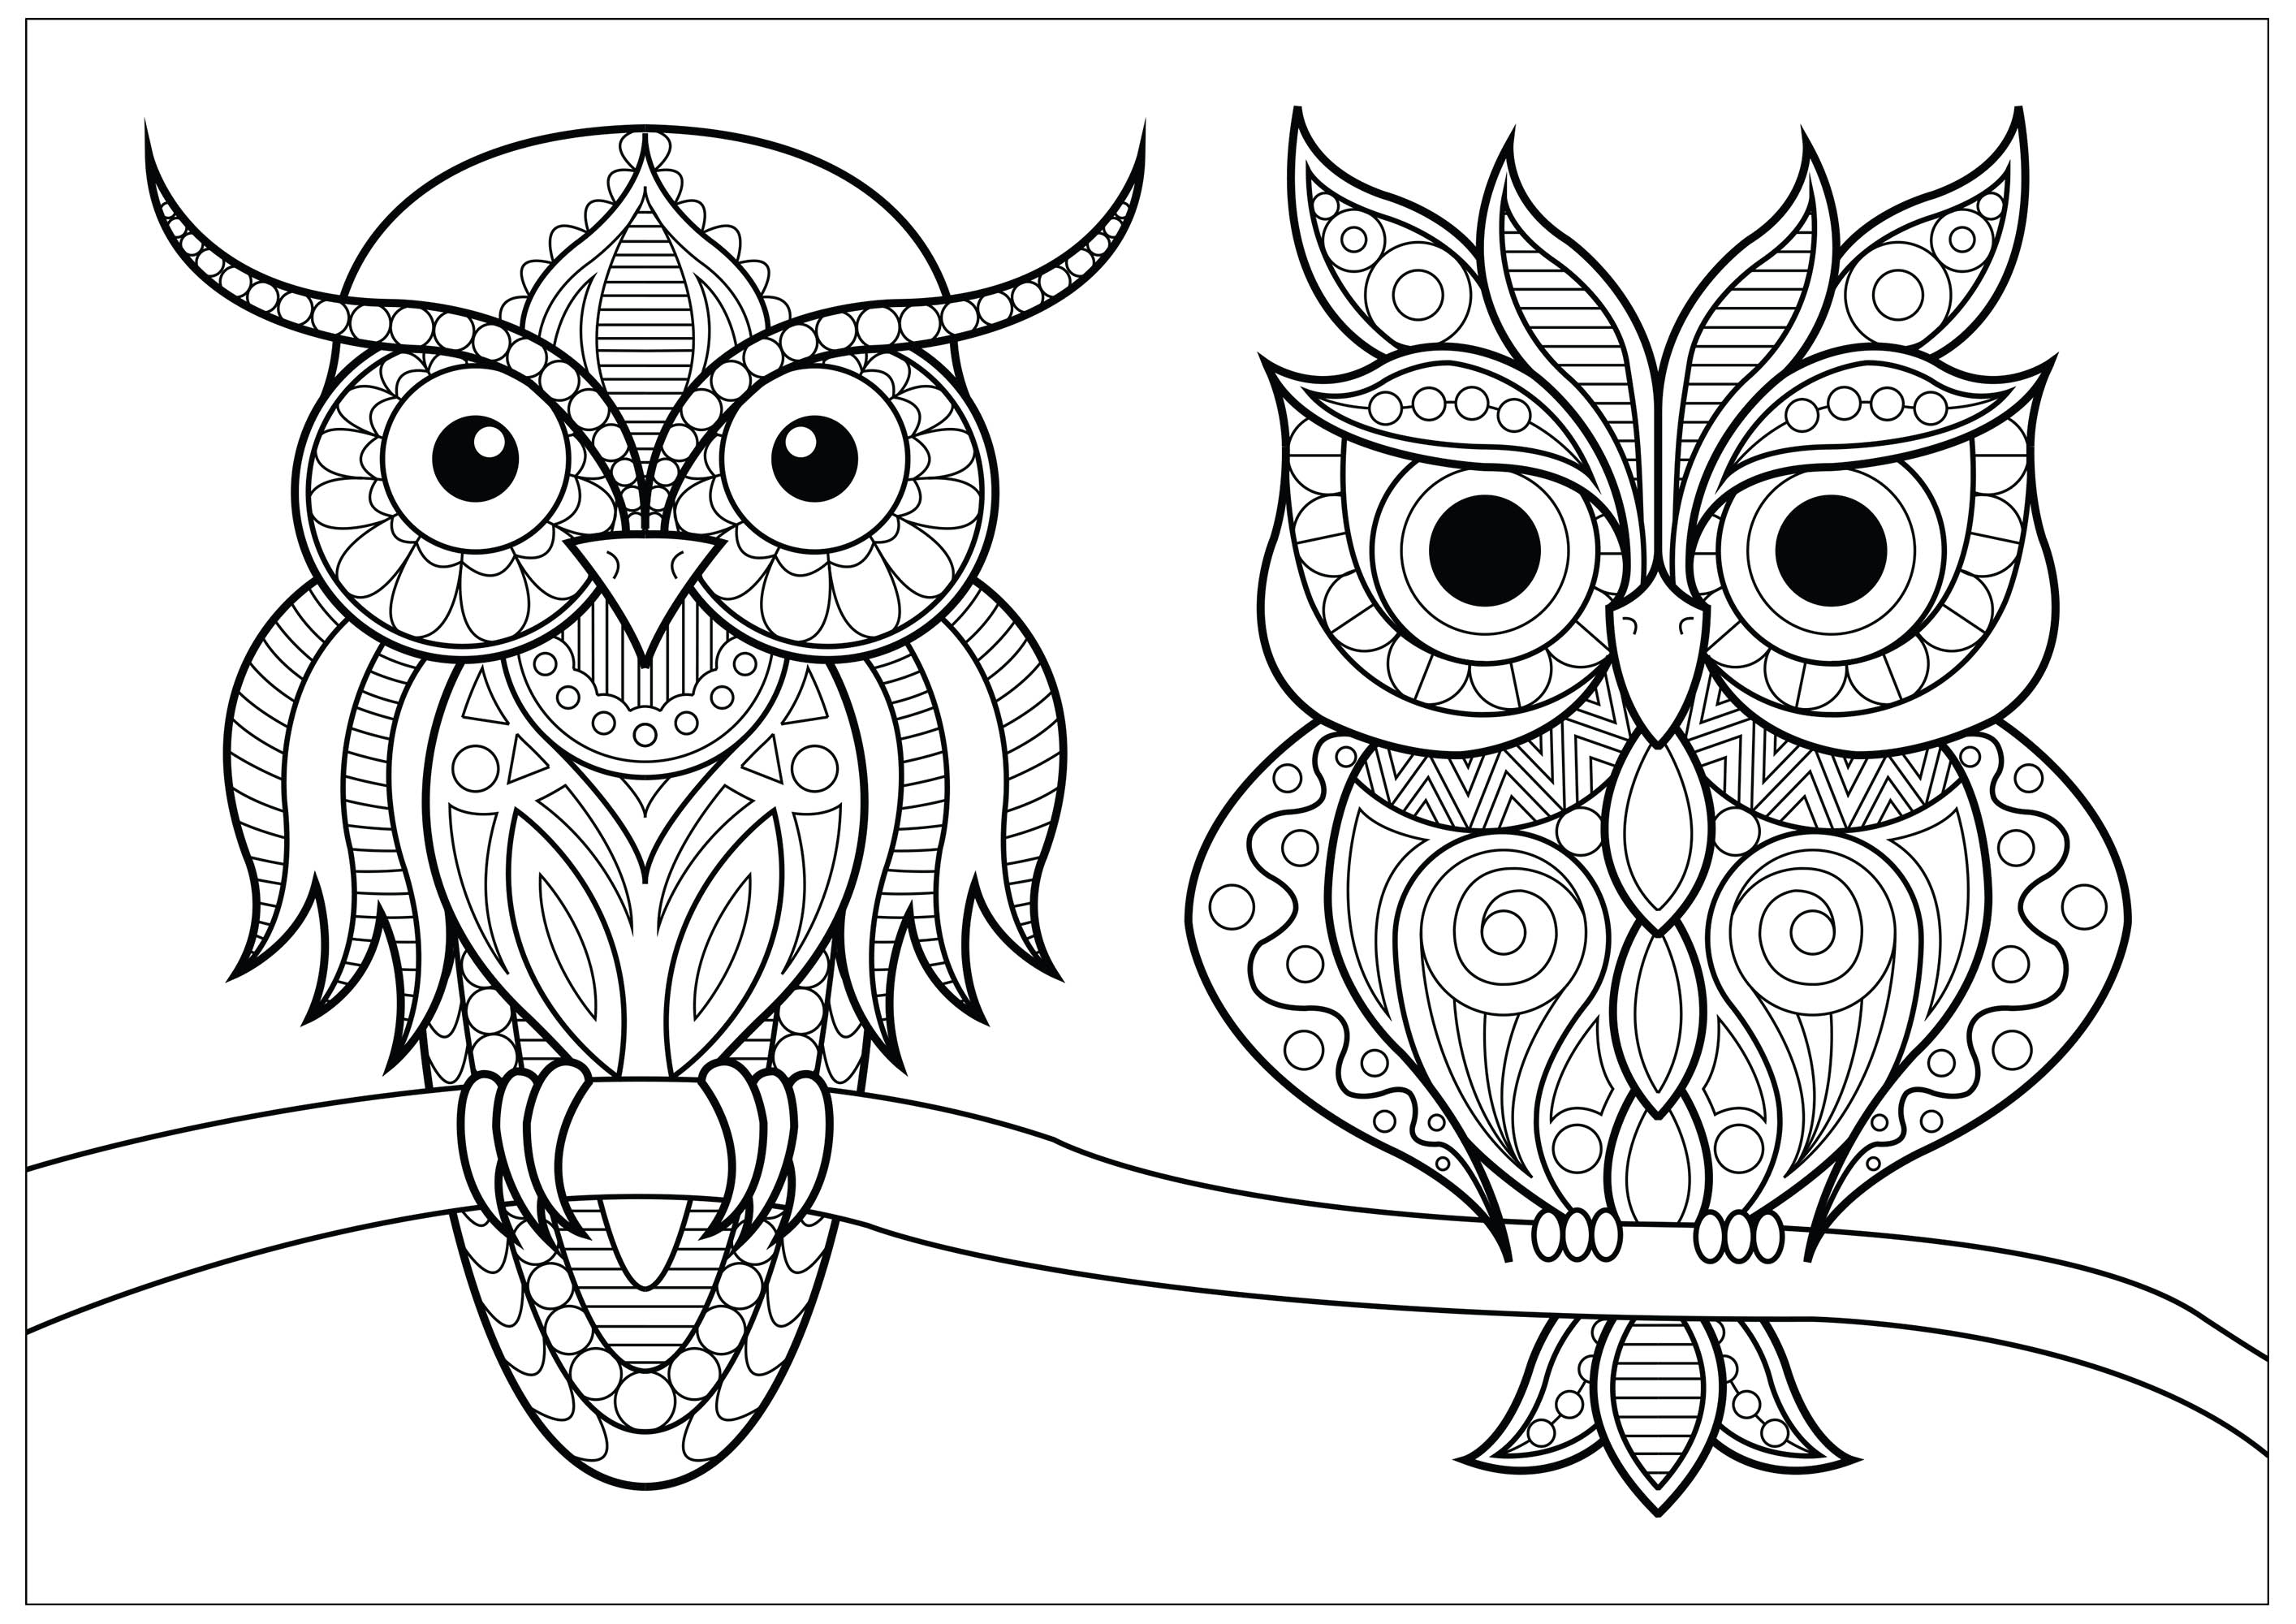 Two owls with simple patterns on branch - Owls Adult Coloring Pages